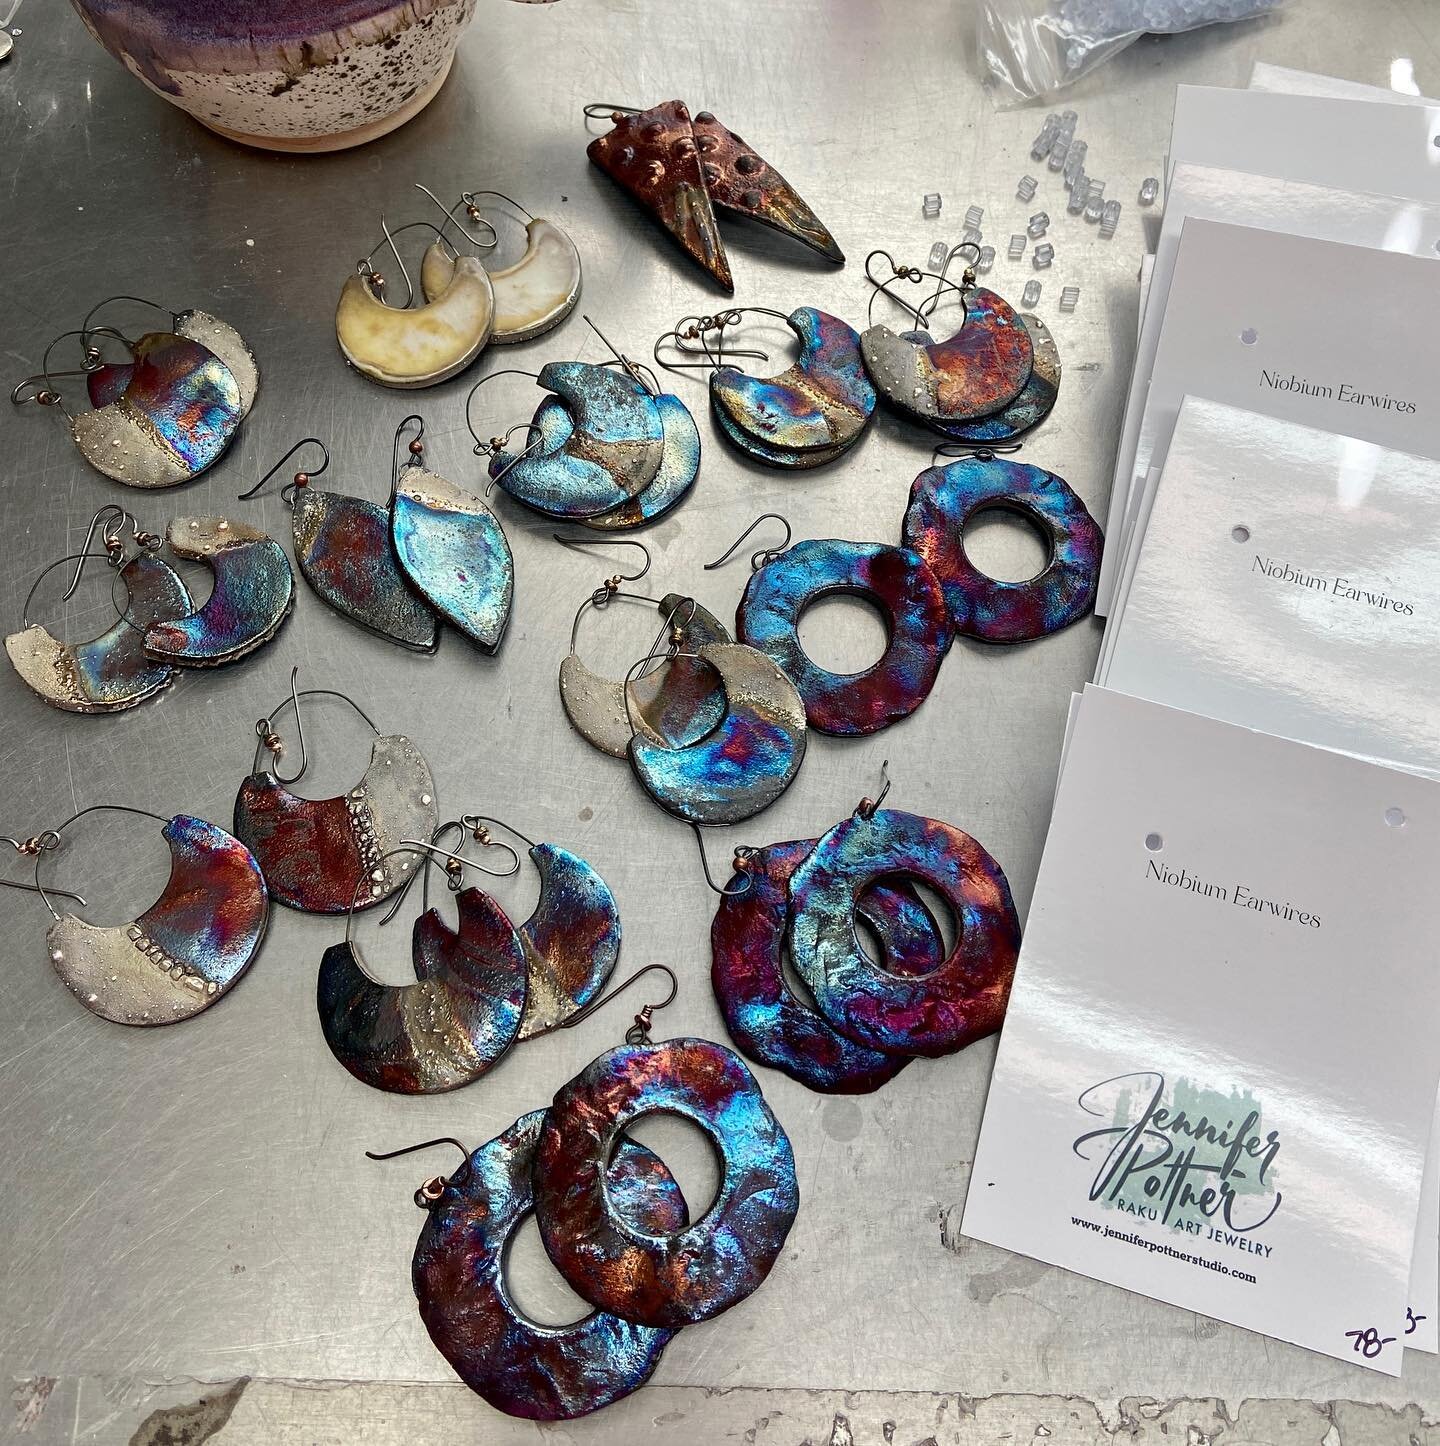 Getting ready for Art on the Commons in Kettering next Sunday!  These flashy raku fired earrings will be there.  I&rsquo;m in booth 28.  More pics and info to come &hellip;. #artonthecommons #playkettering